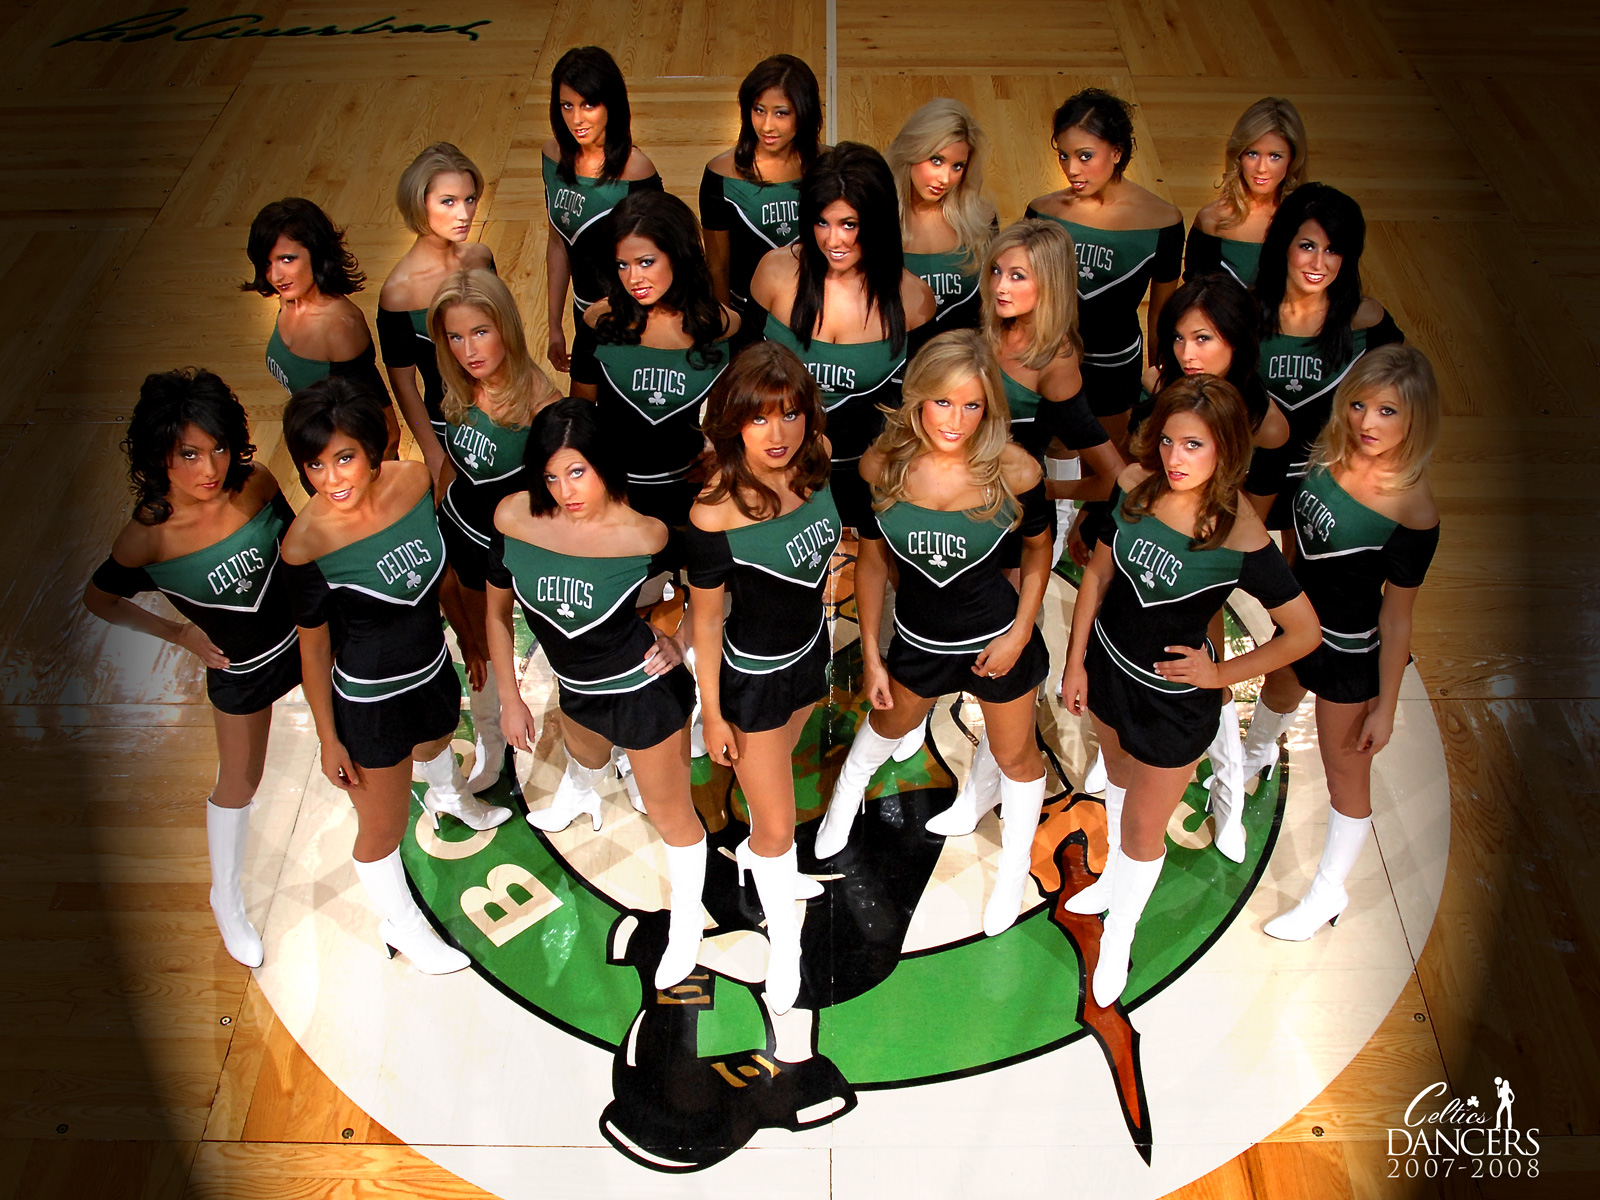 Celtics Dancers   2007 08 Wallpaper The Official Site of the BOSTON